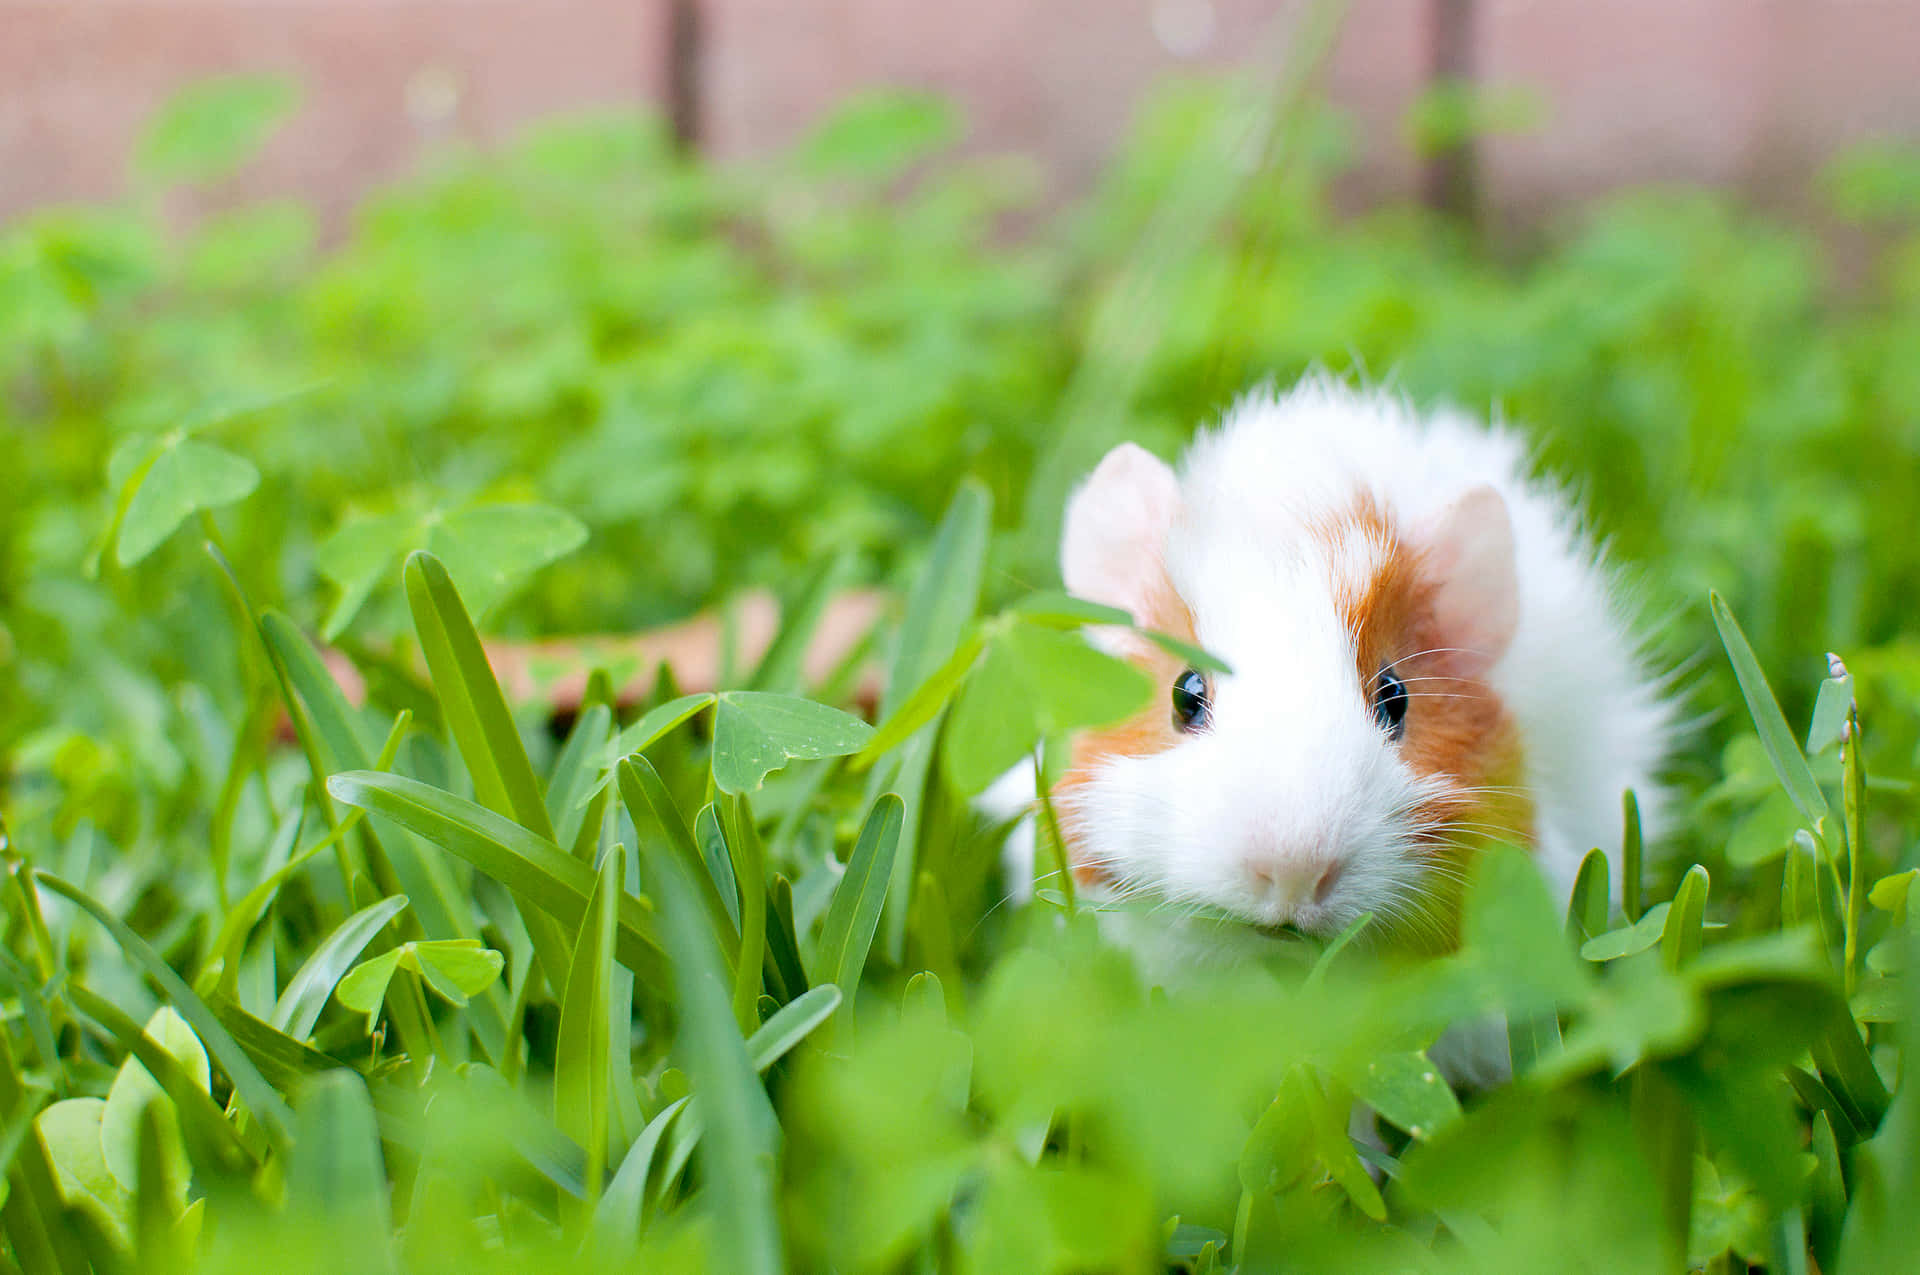 A Small White And Brown Guinea Pig In The Grass